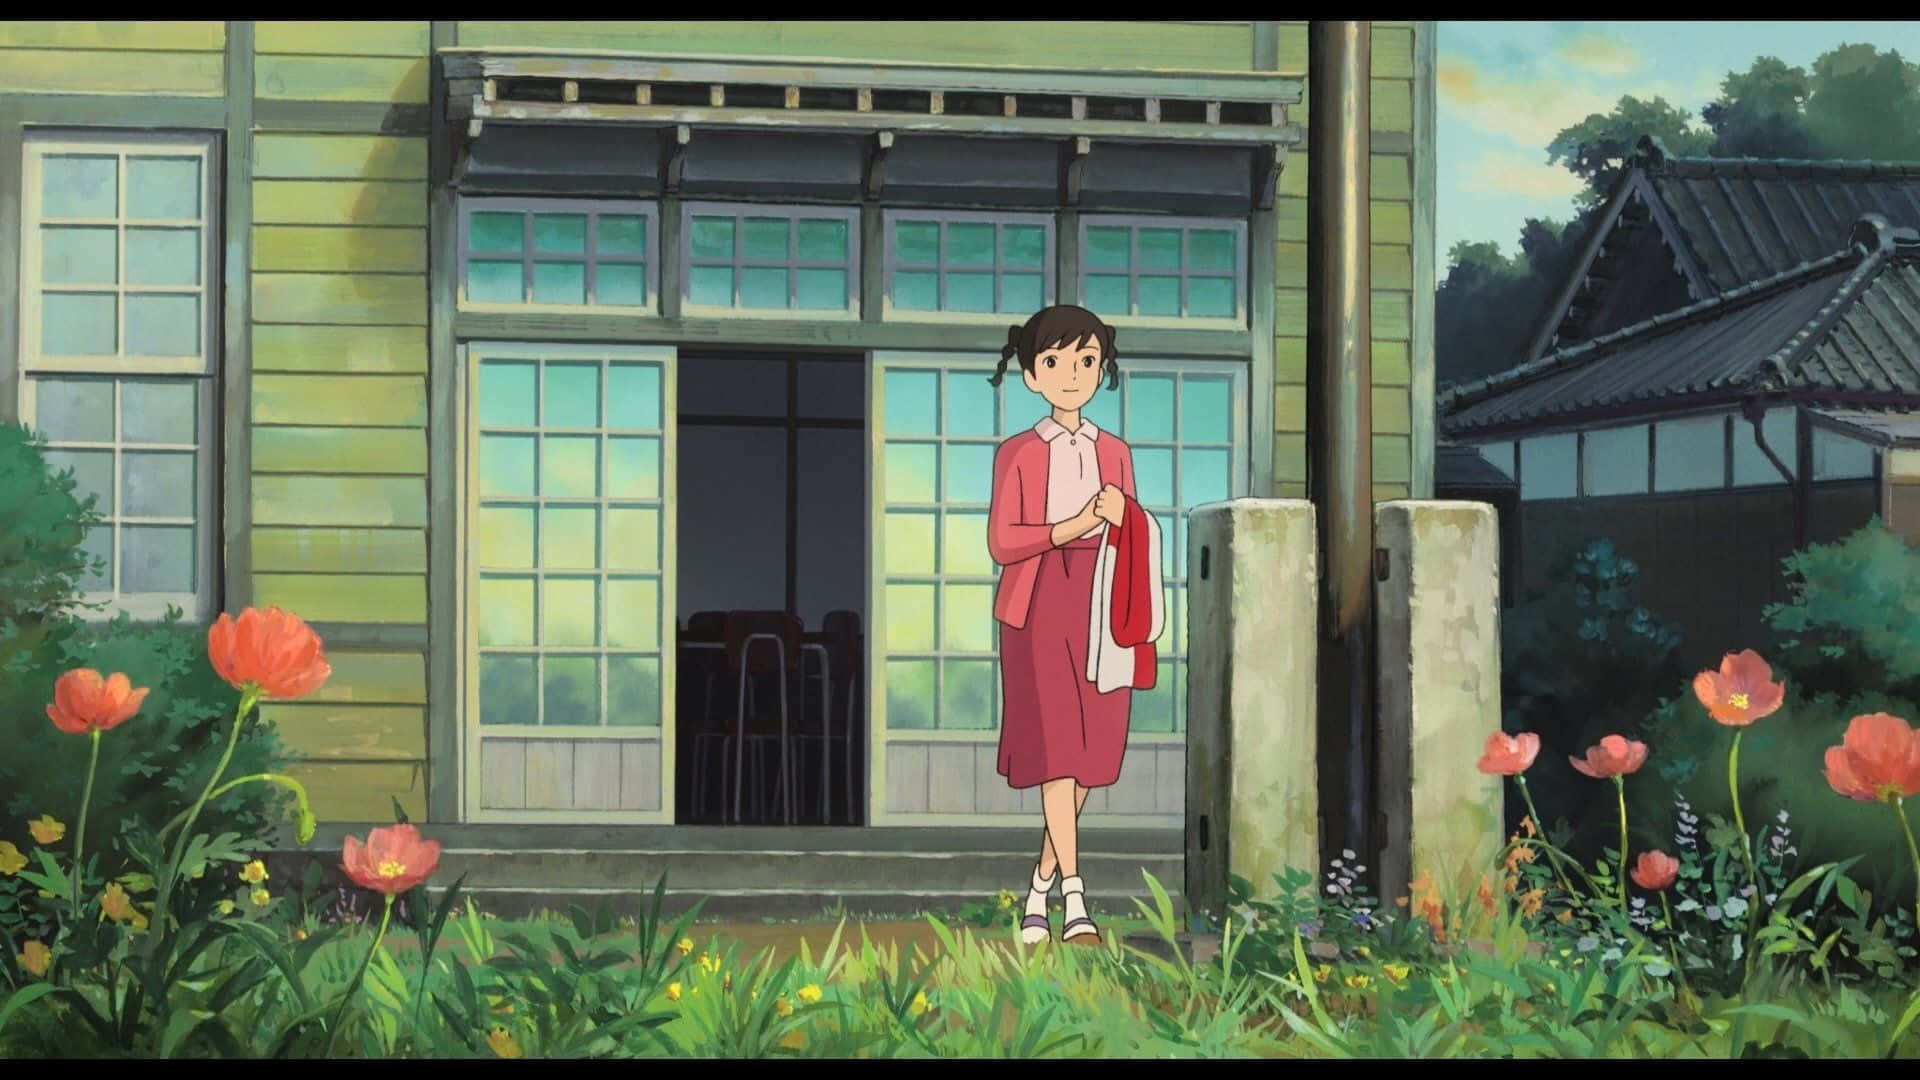 A peaceful scene of the port of Yokohama in the movie "From Up on Poppy Hill"